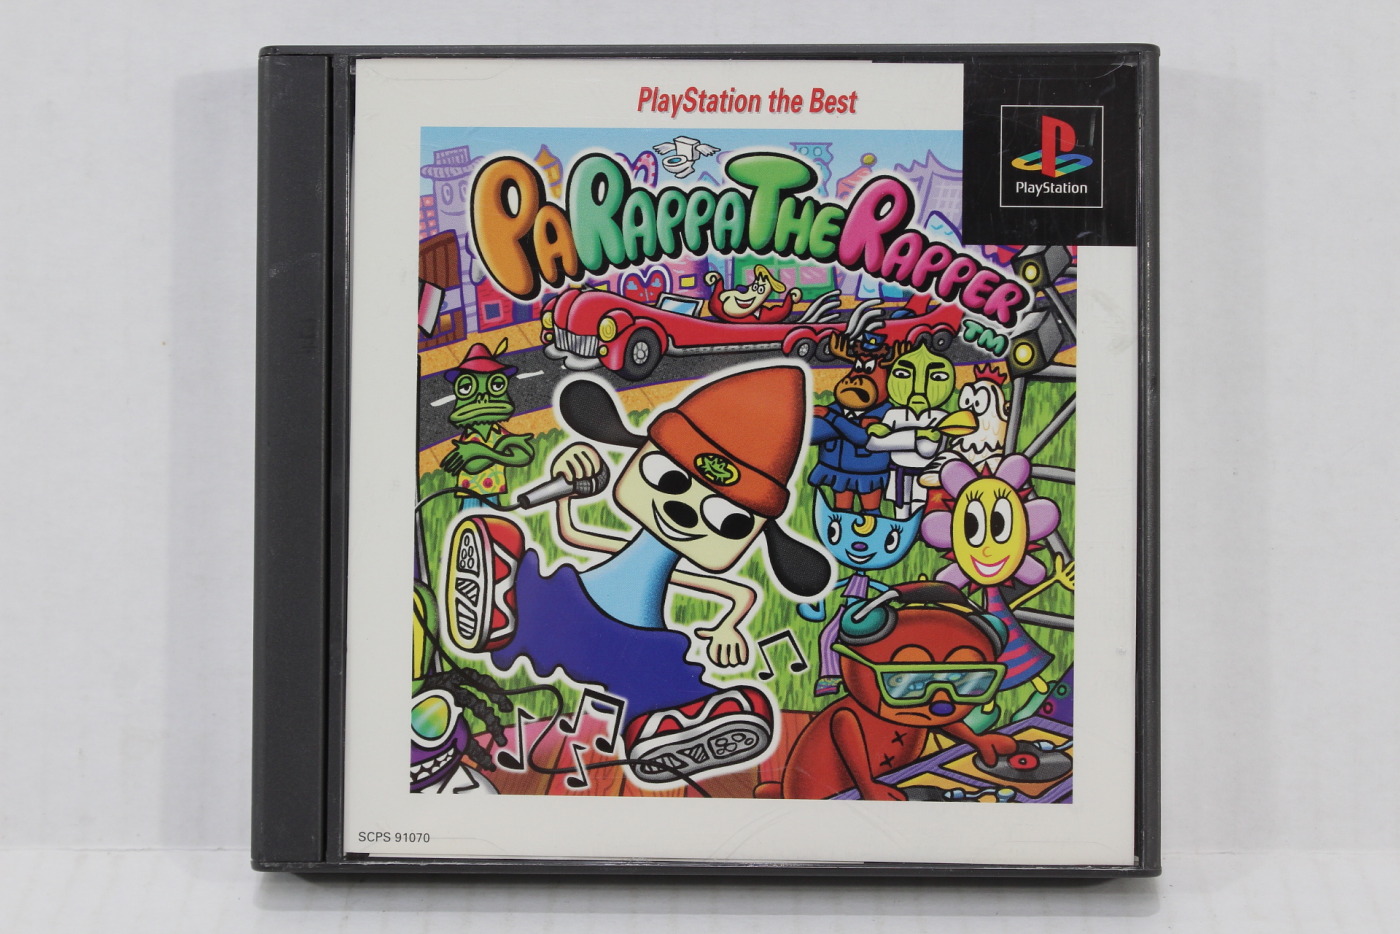 PARAPPA THE RAPPER 2 [PLAYSTATION 2 THE BEST] - (NTSC-J)